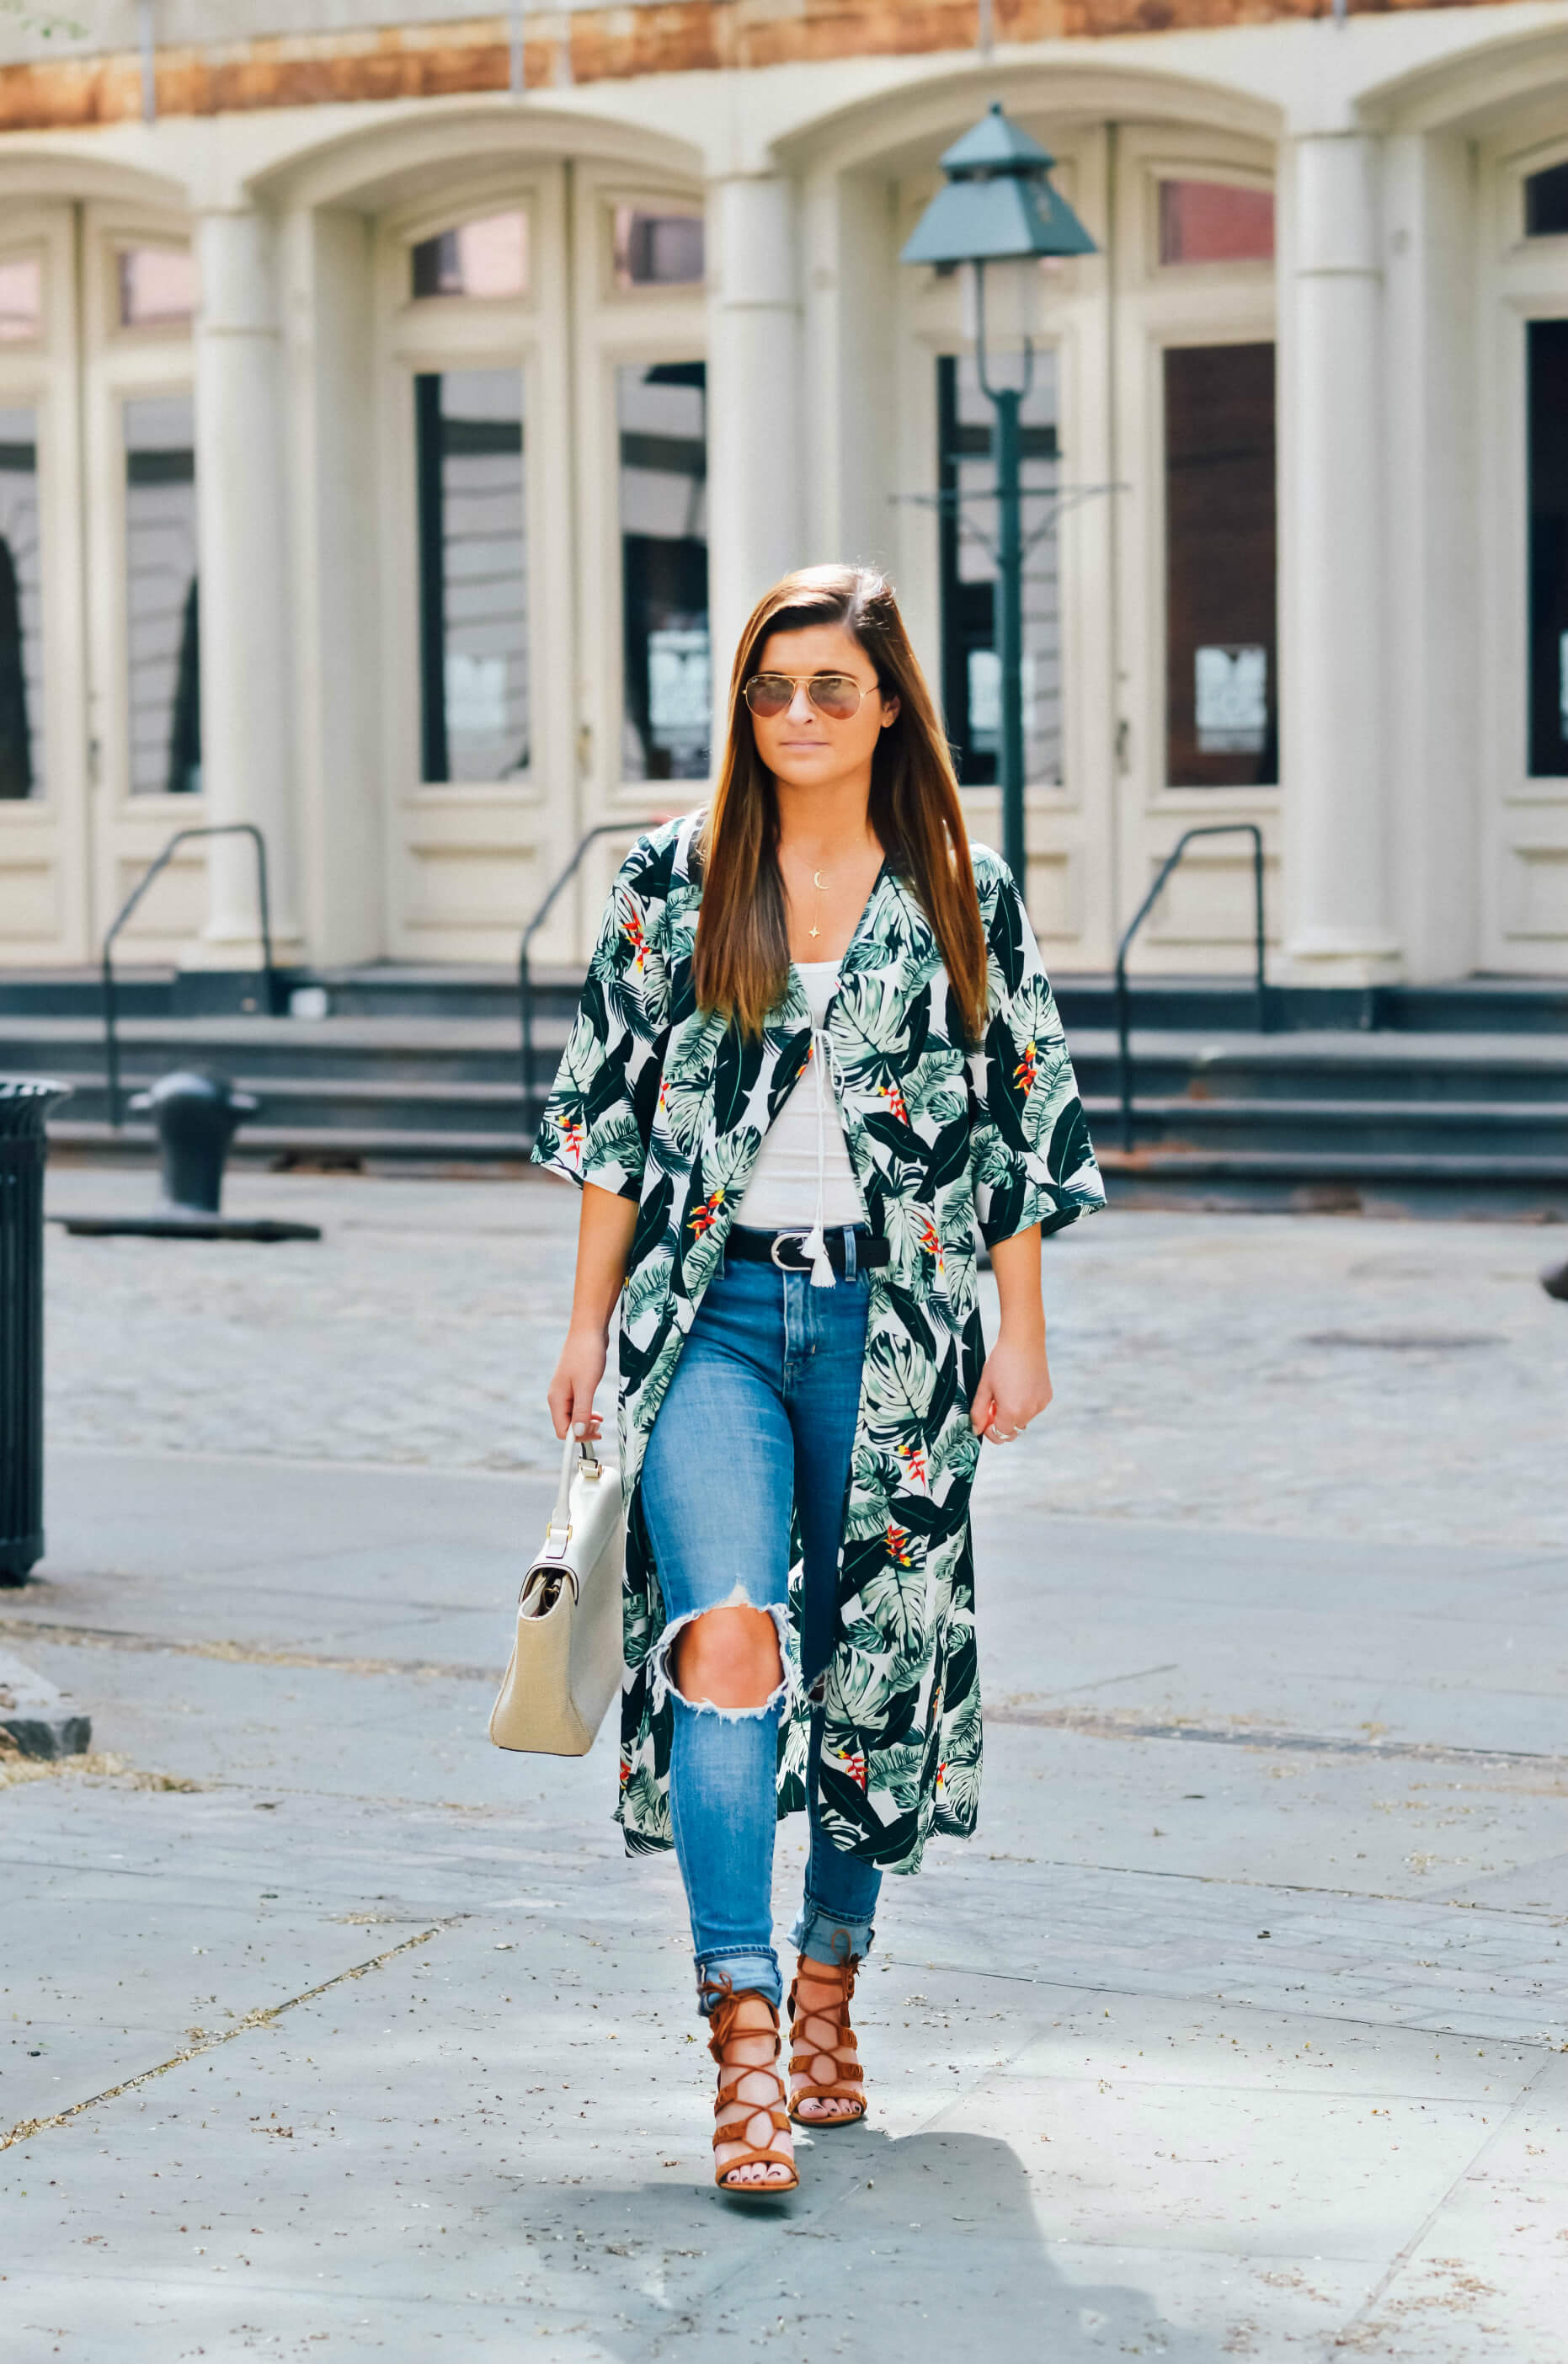 Rachel Zoe Collection Palm Print Duster, Kate Spade Straw Bag, Levi's 721 High Rise Skinny Denim, Spring Style, Tilden of To Be Bright